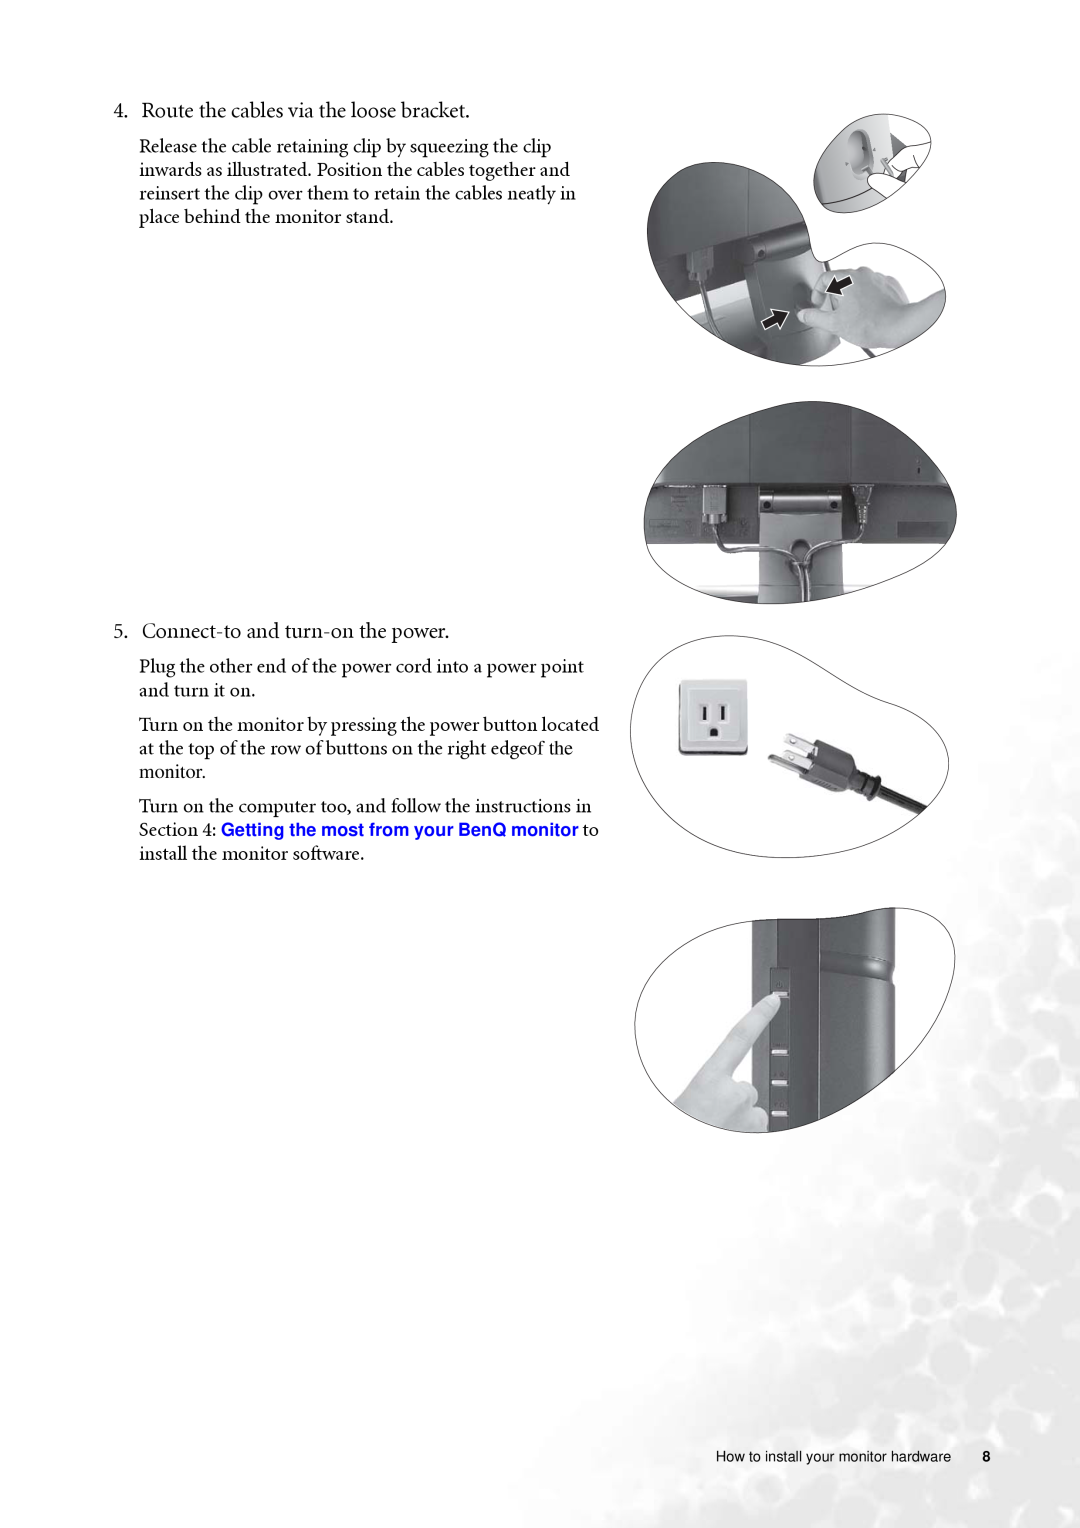 BenQ FP202W user manual Route the cables via the loose bracket, Connect-to and turn-on the power 